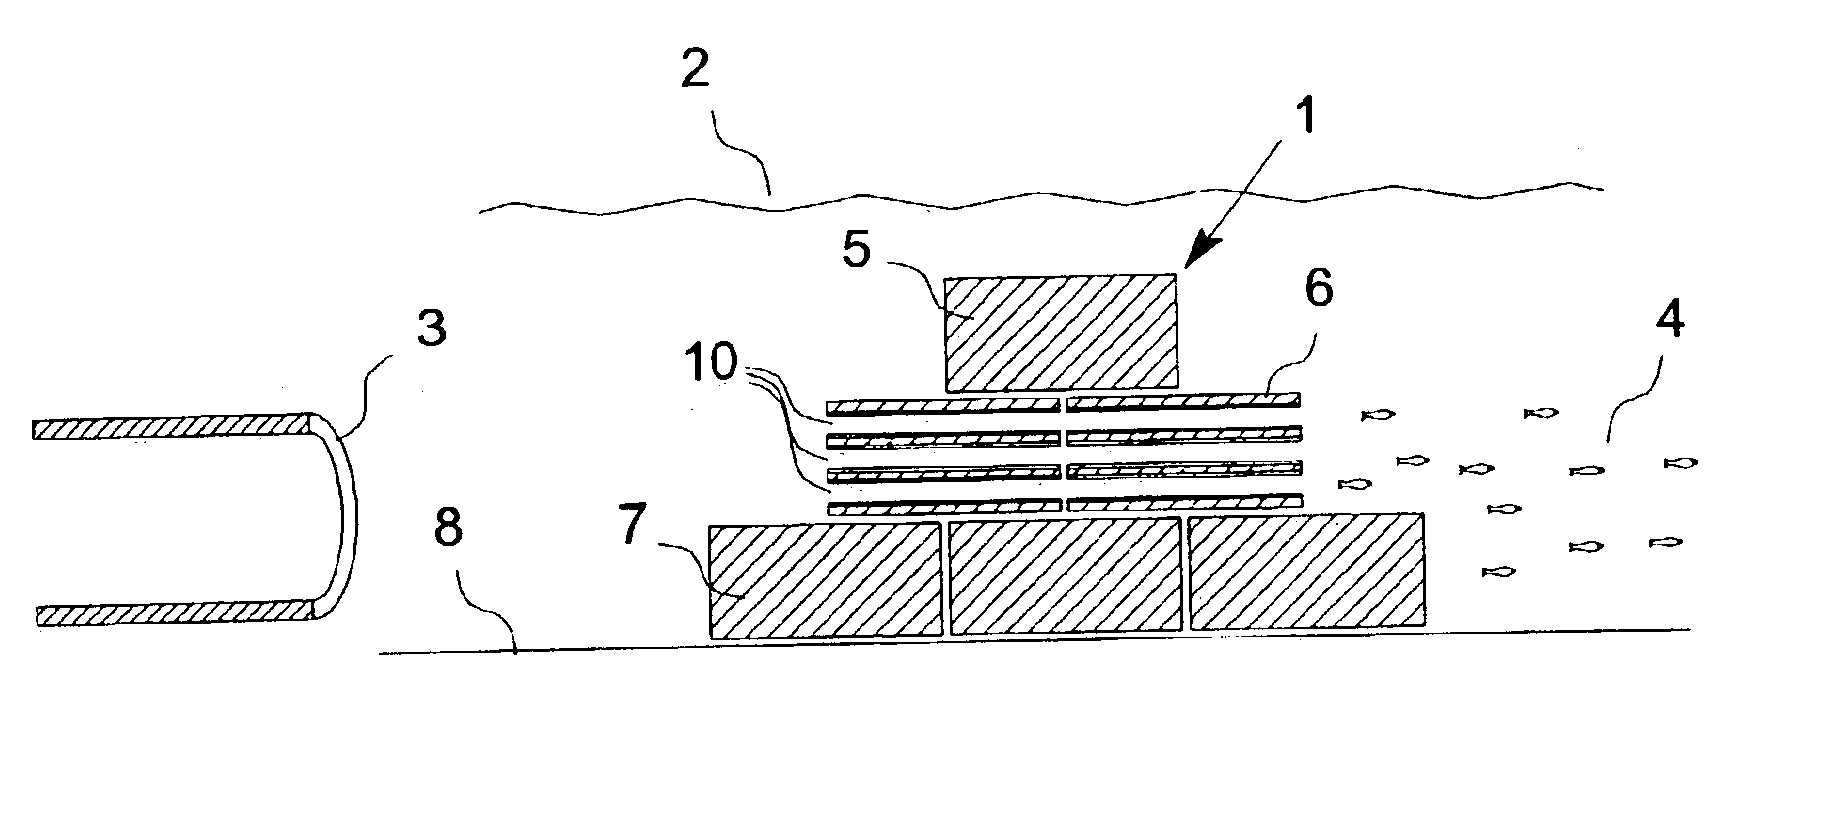 Porous dike intake structure for fish diversion